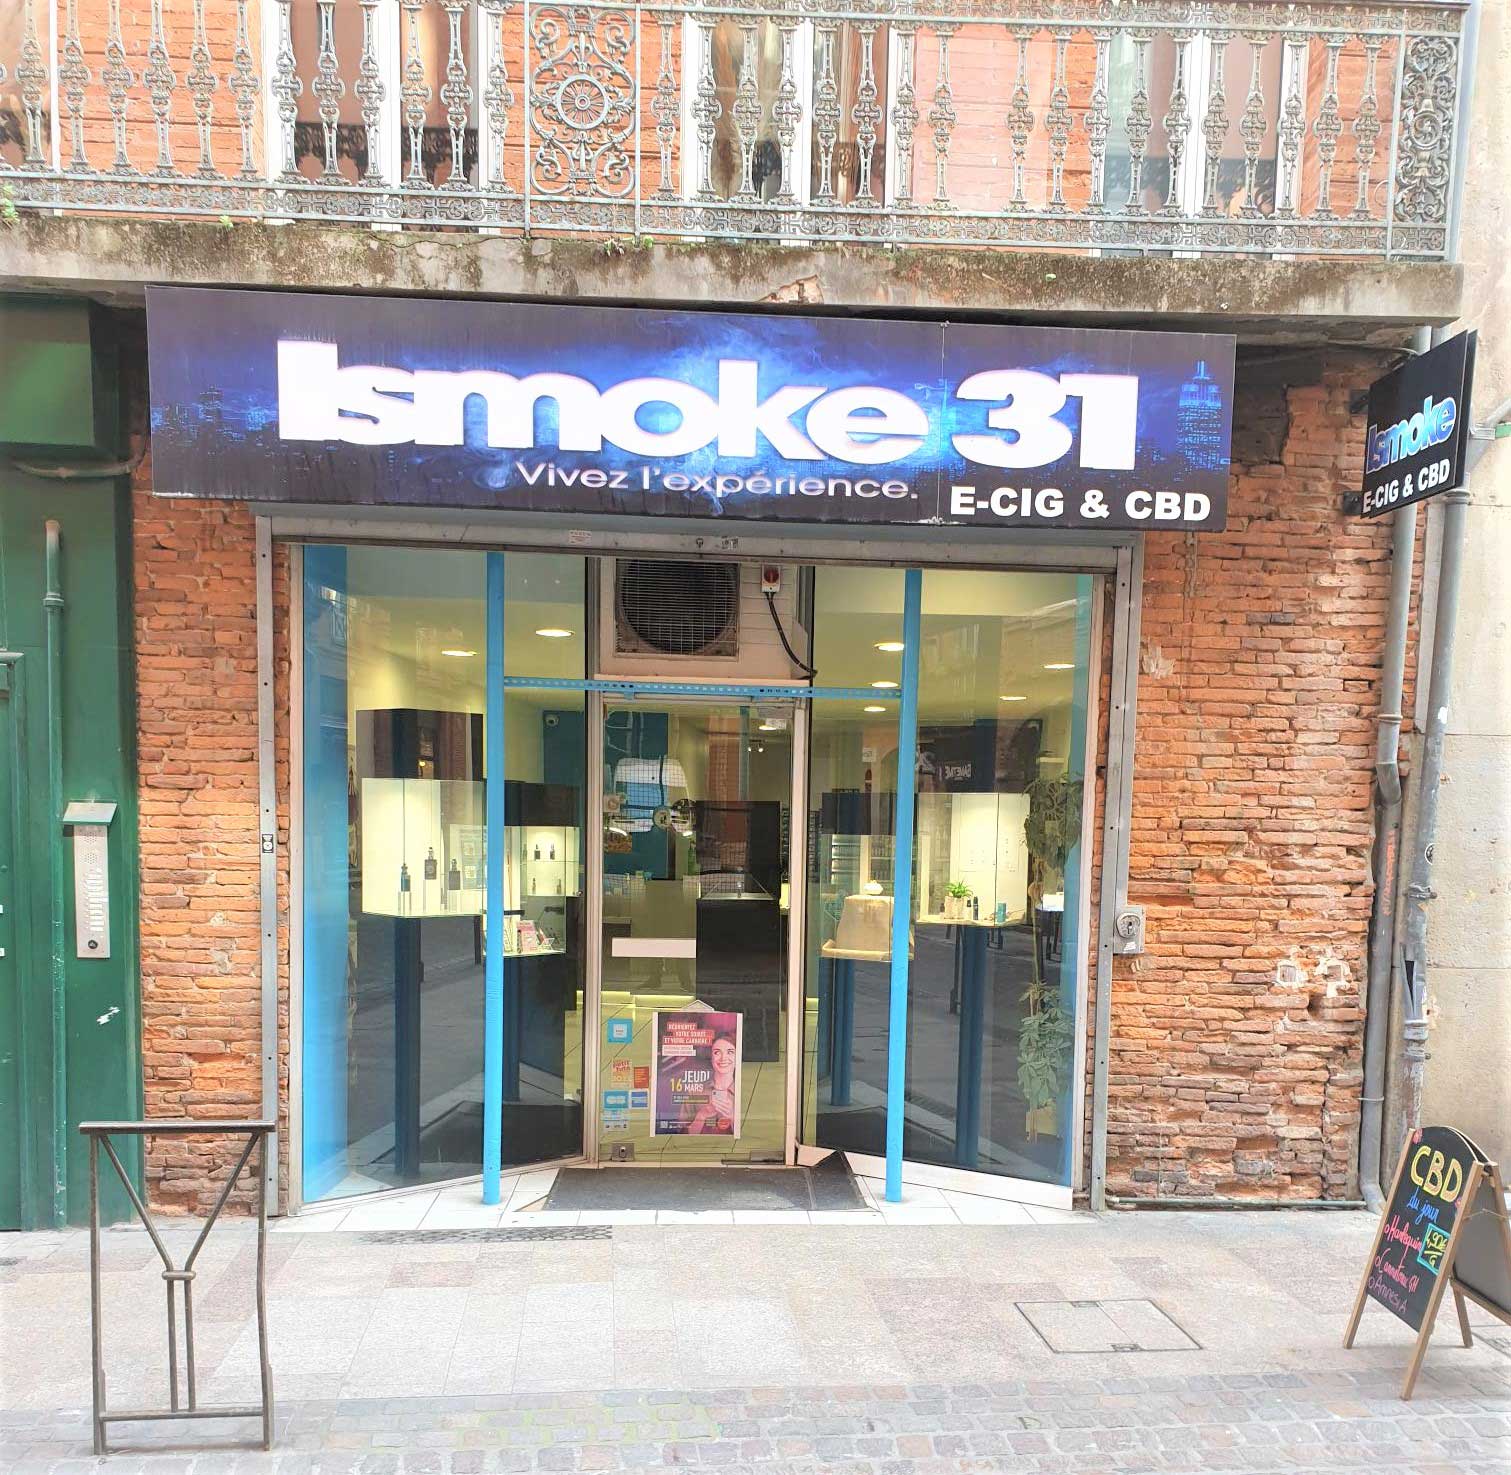 consigne-à-bagage-toulouse-stasher-boutique-Ismoke31